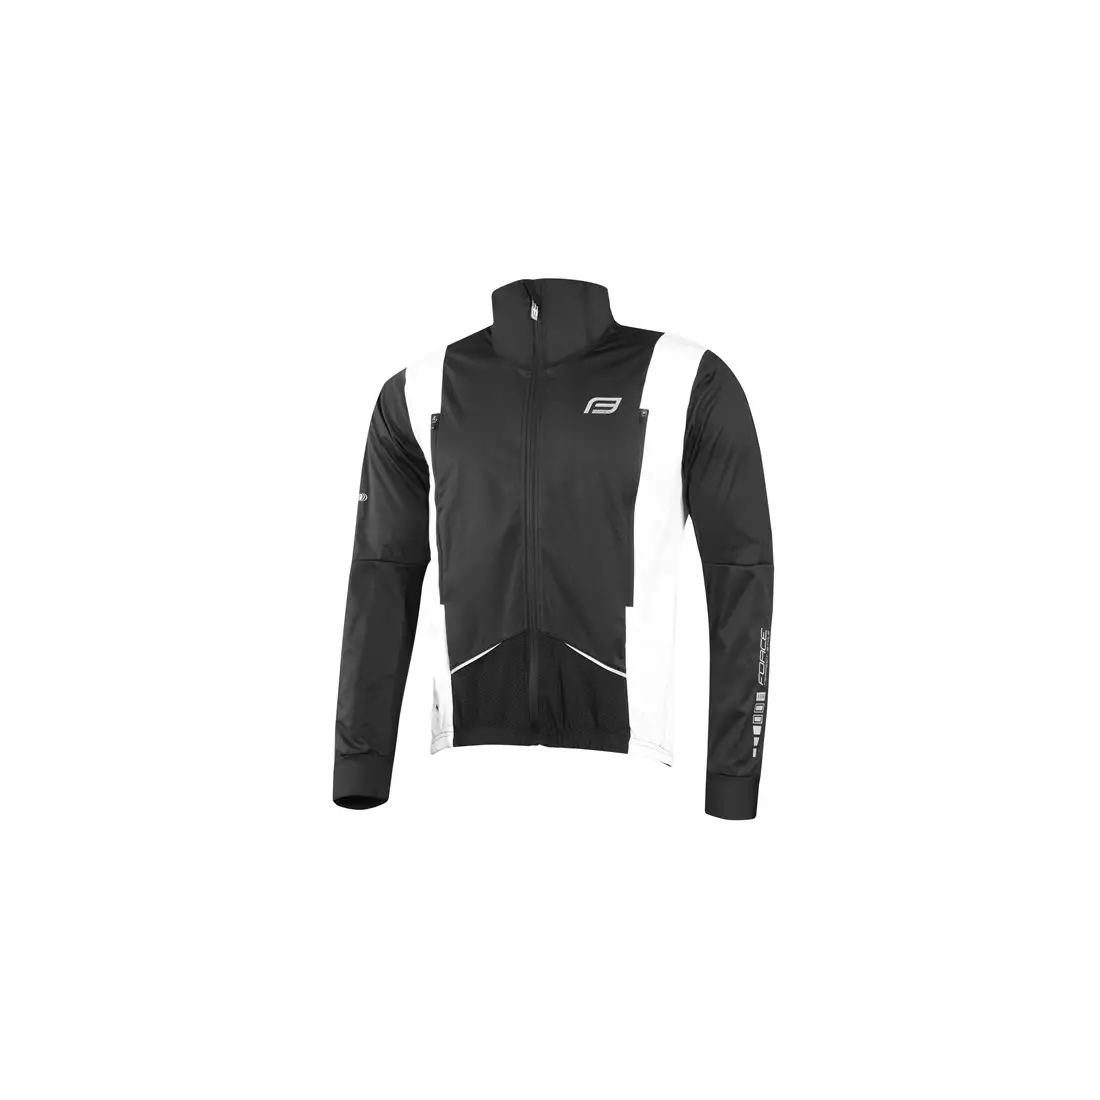 FORCE X58 light cycling jacket bicycle windbreaker black and white